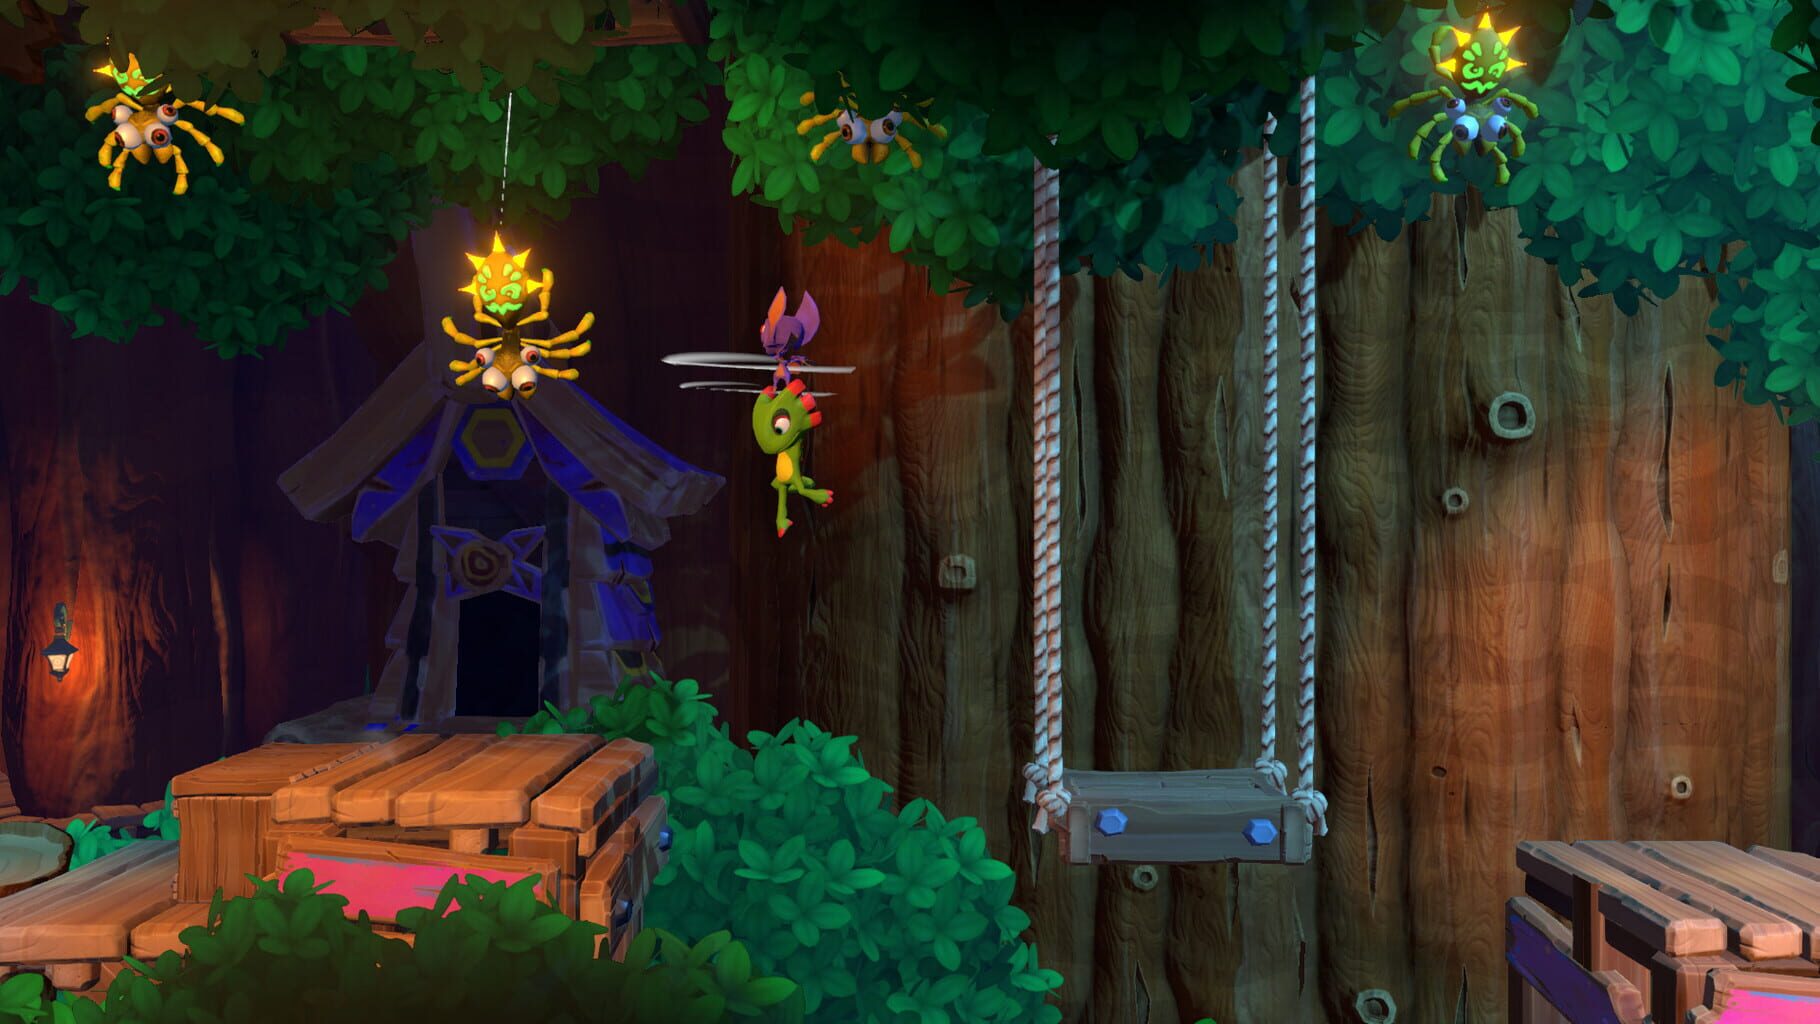 Yooka-Laylee and the Impossible Lair screenshots